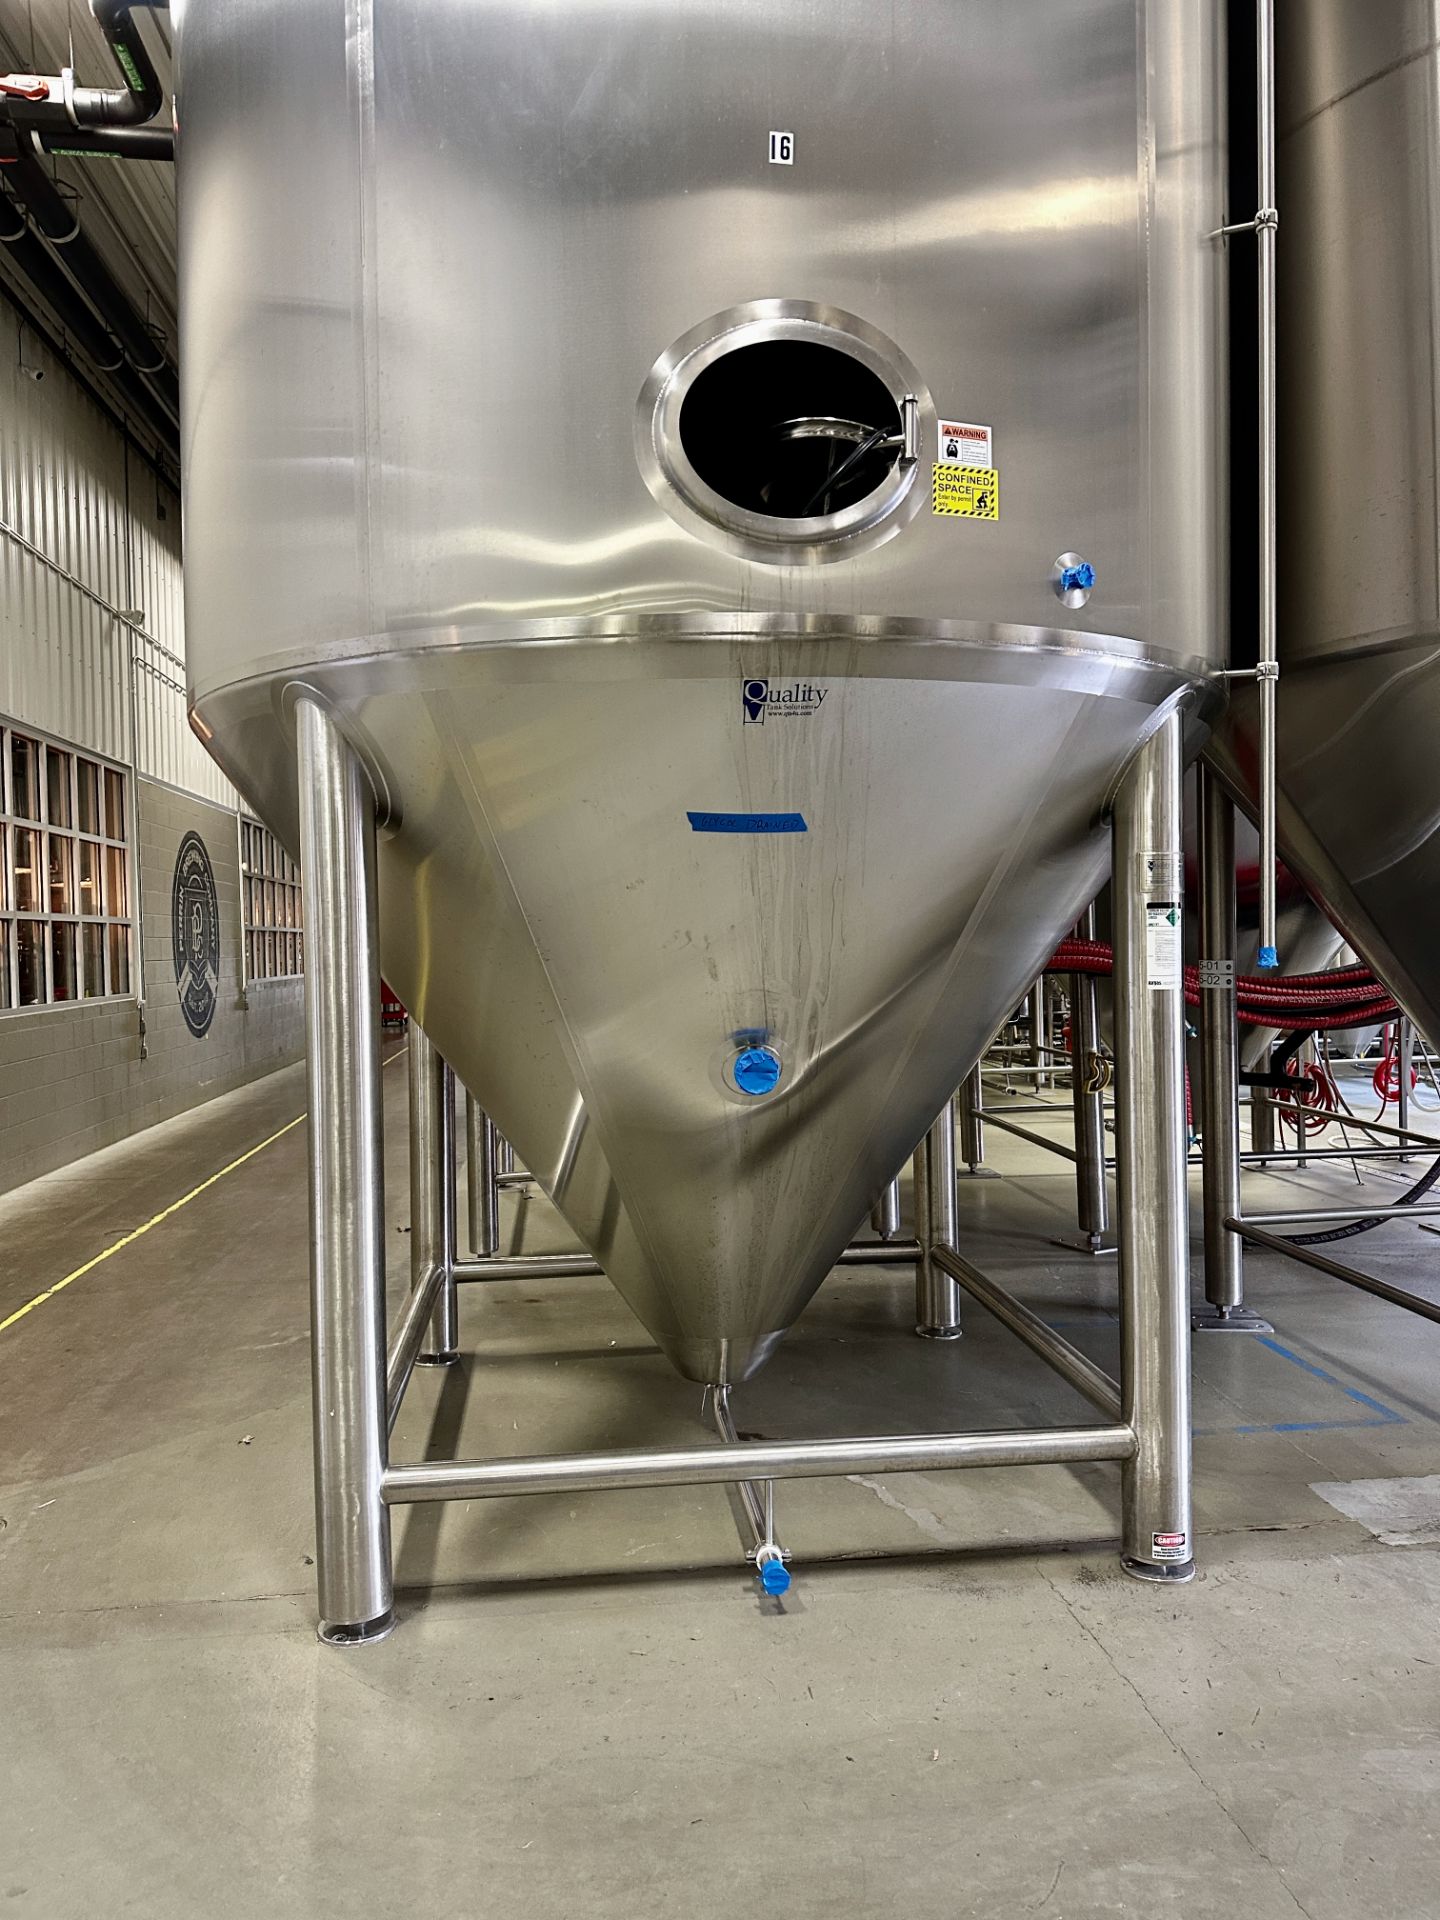 2020 Quality Tank (QTS) 150 BBL FV or 5,500 Gal Max Capacity Jacketed Fermentation | Rig Fee $2300 - Image 2 of 8